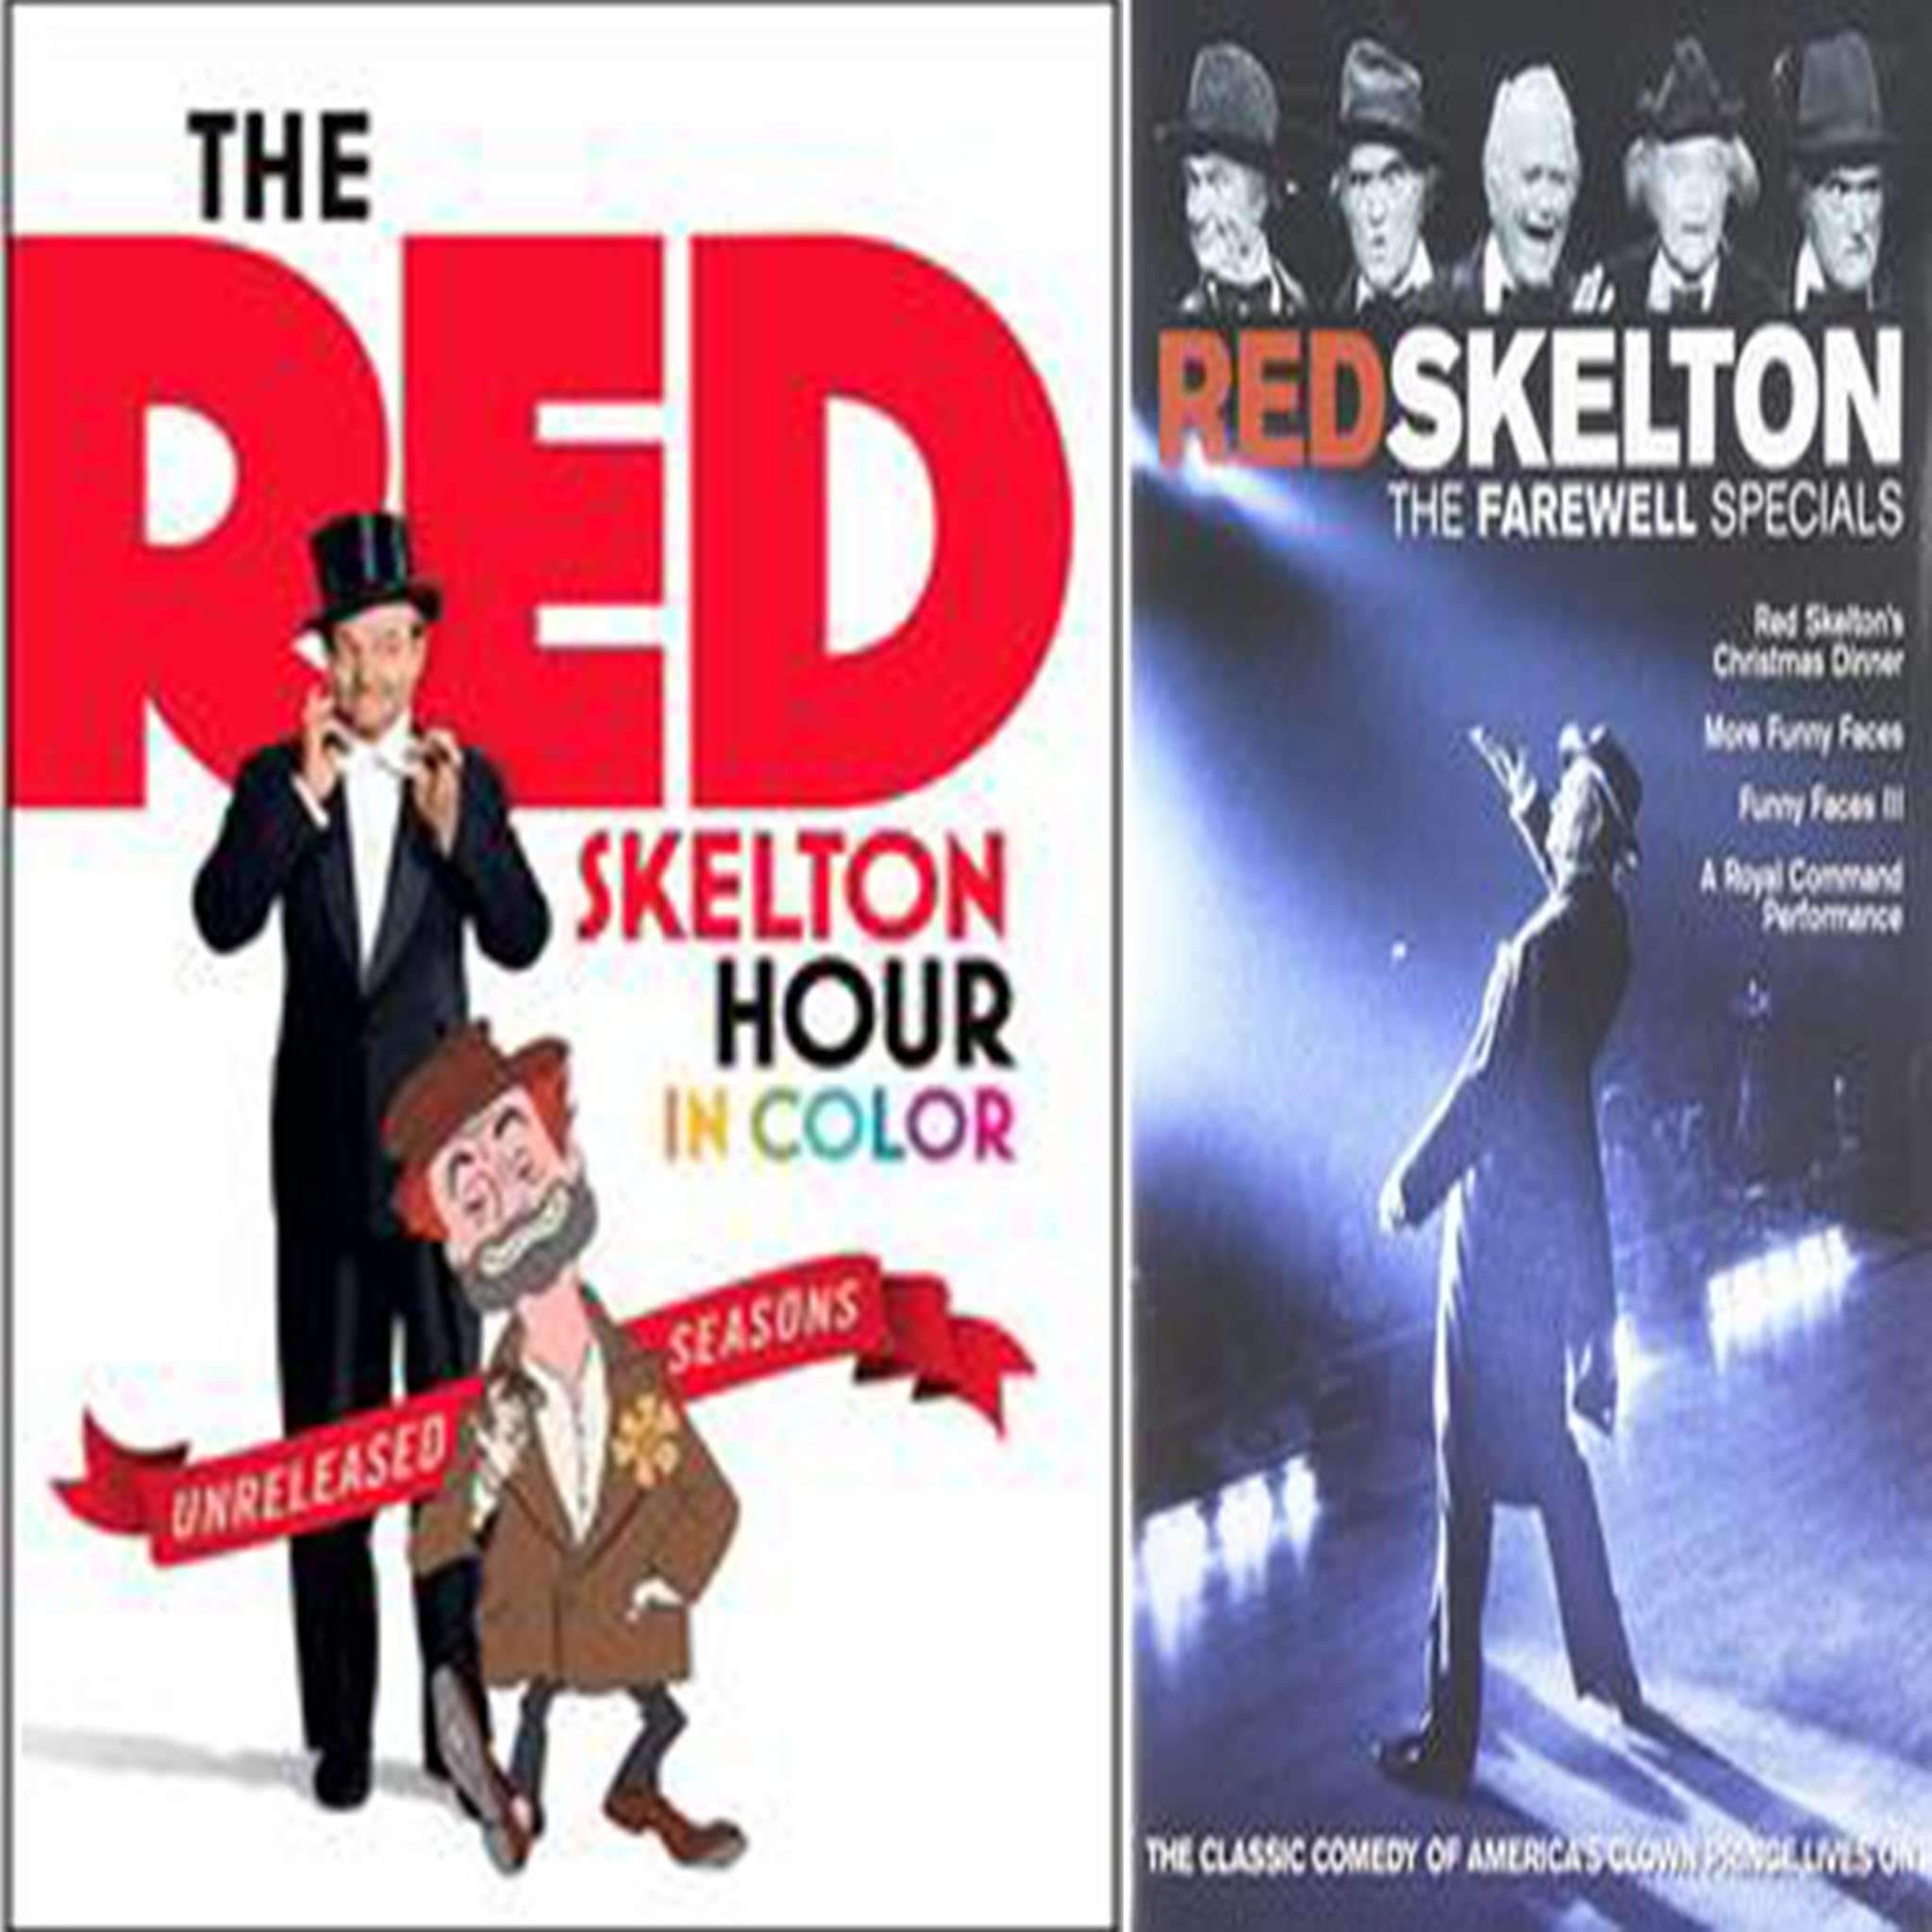 Red Skelton Hour DVD Box  Set Time Life Entertainment DVDs & Blu-ray Discs > DVDs > Box Sets